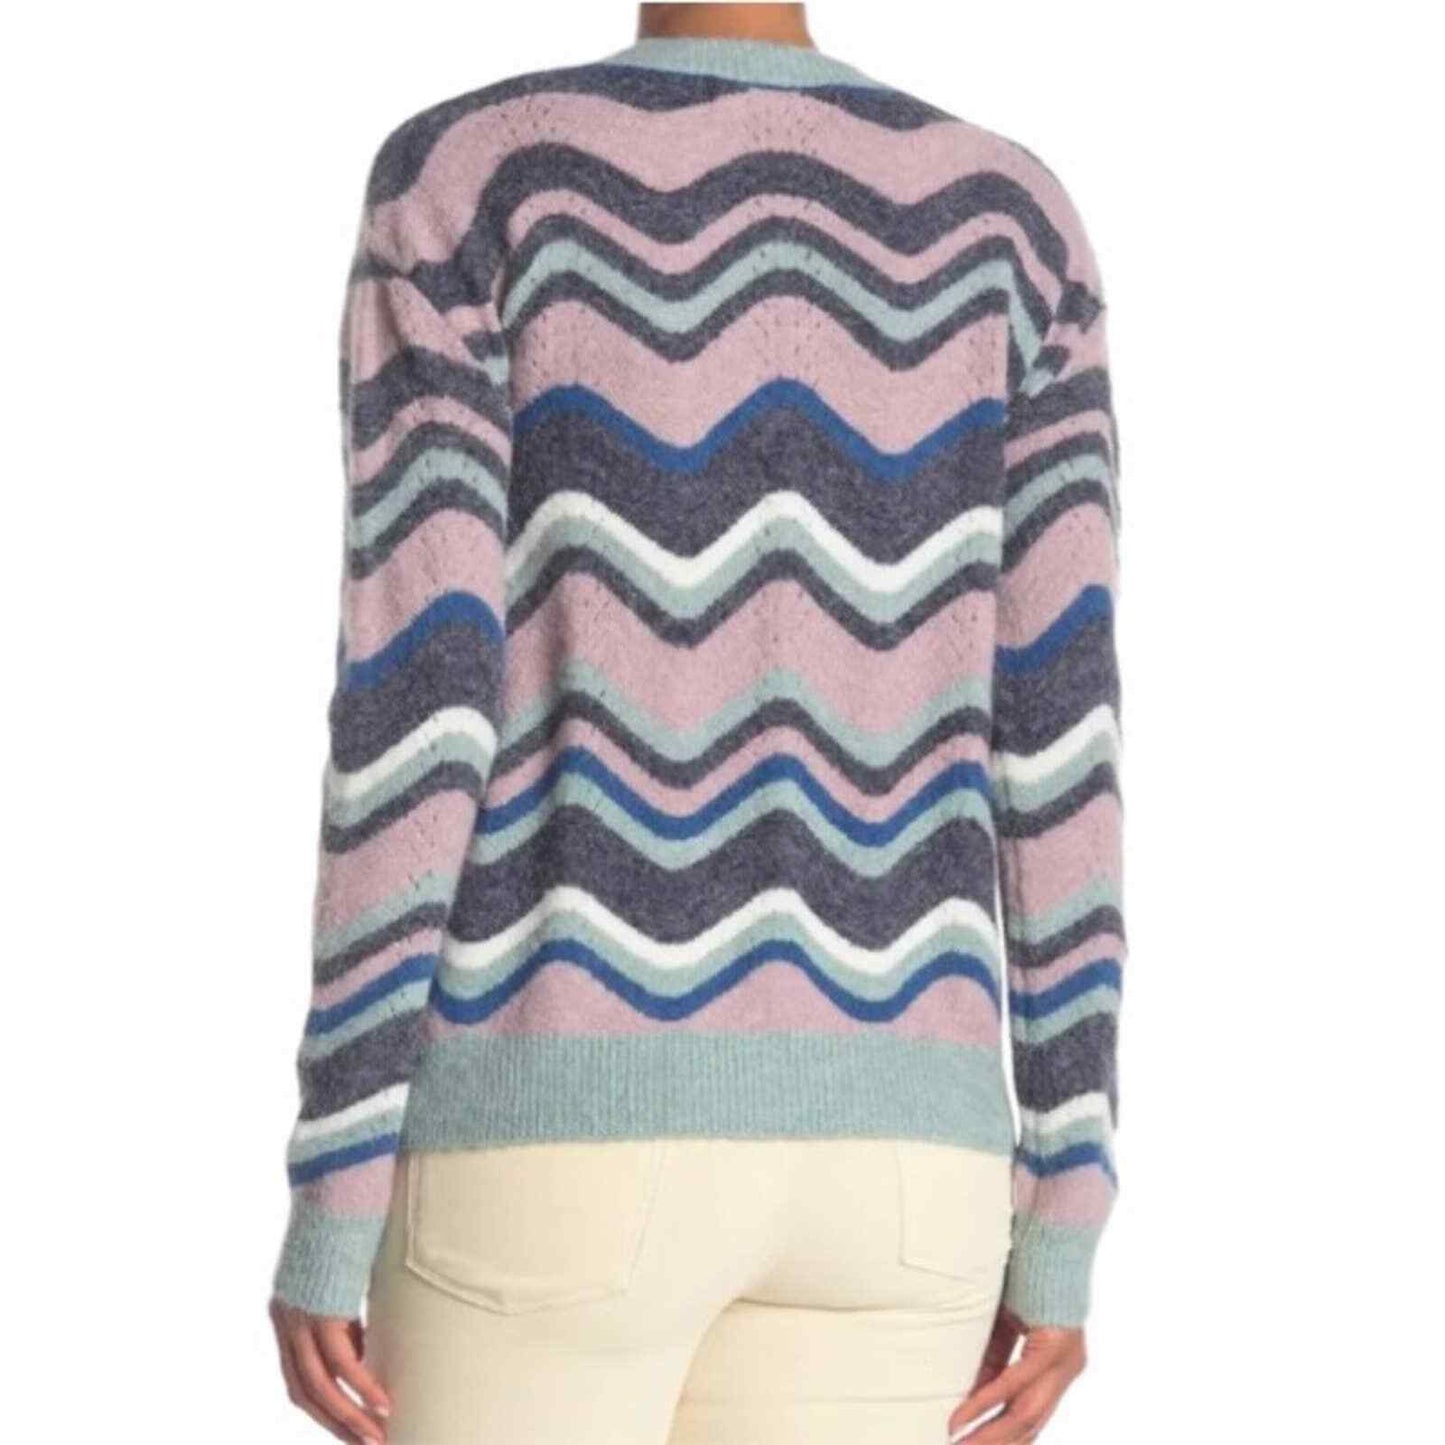 Boundless North Womens M Crochet Patched Zig Zag Sweater Cozy Pullover Fuzzy